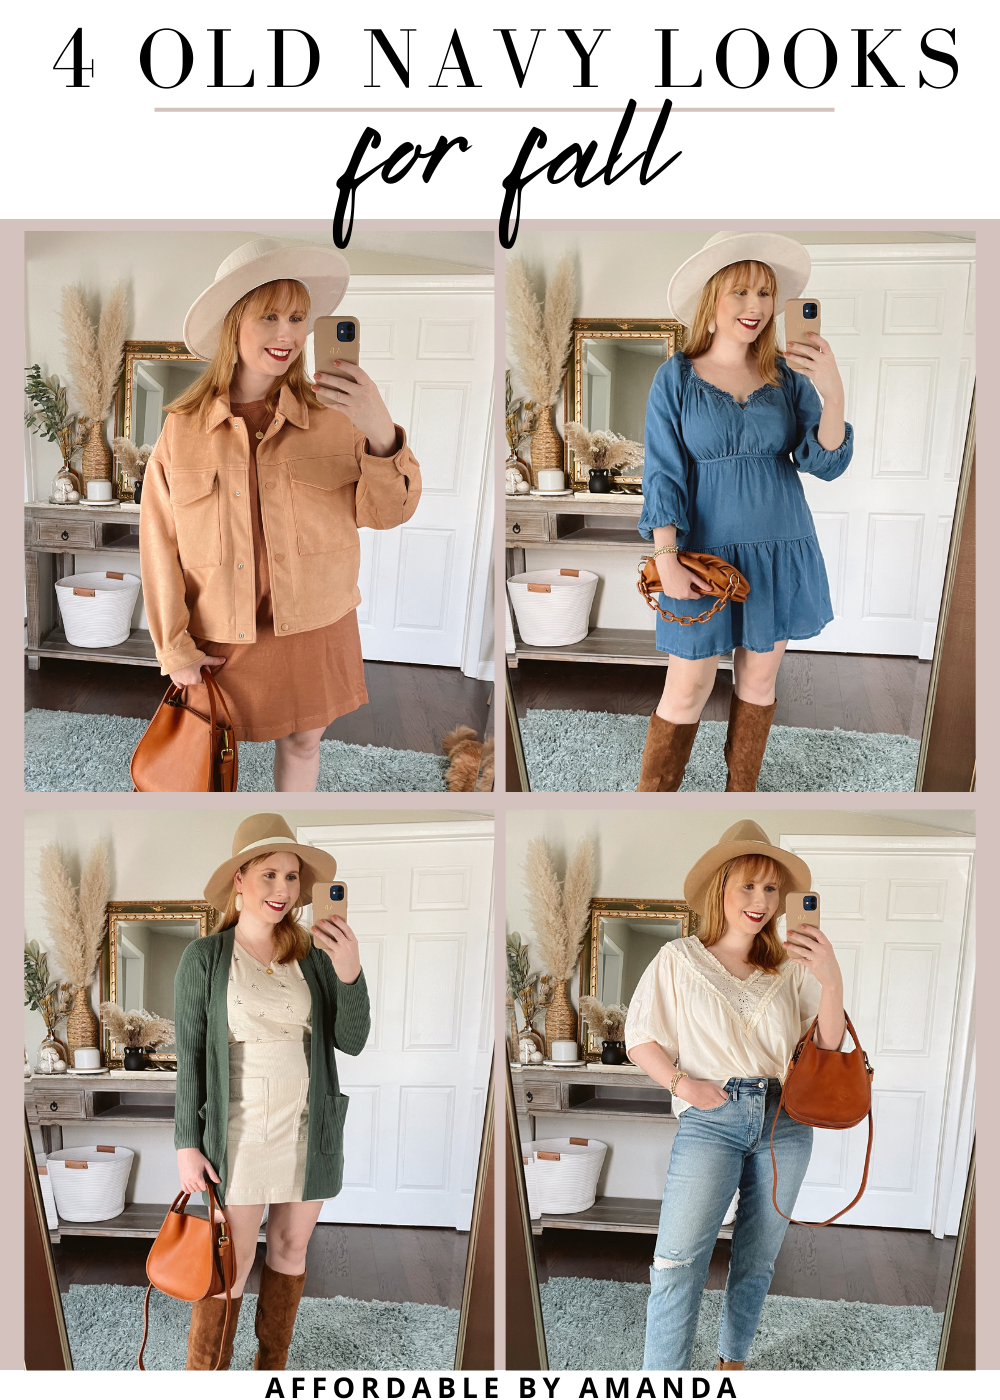 Fall Fashion 2021 - Old Navy. 4 Old Navy Looks for Fall 2021. Affordable by Amanda Shares an Old Navy Fall 2021 Preview. Old Navy Try On Haul.